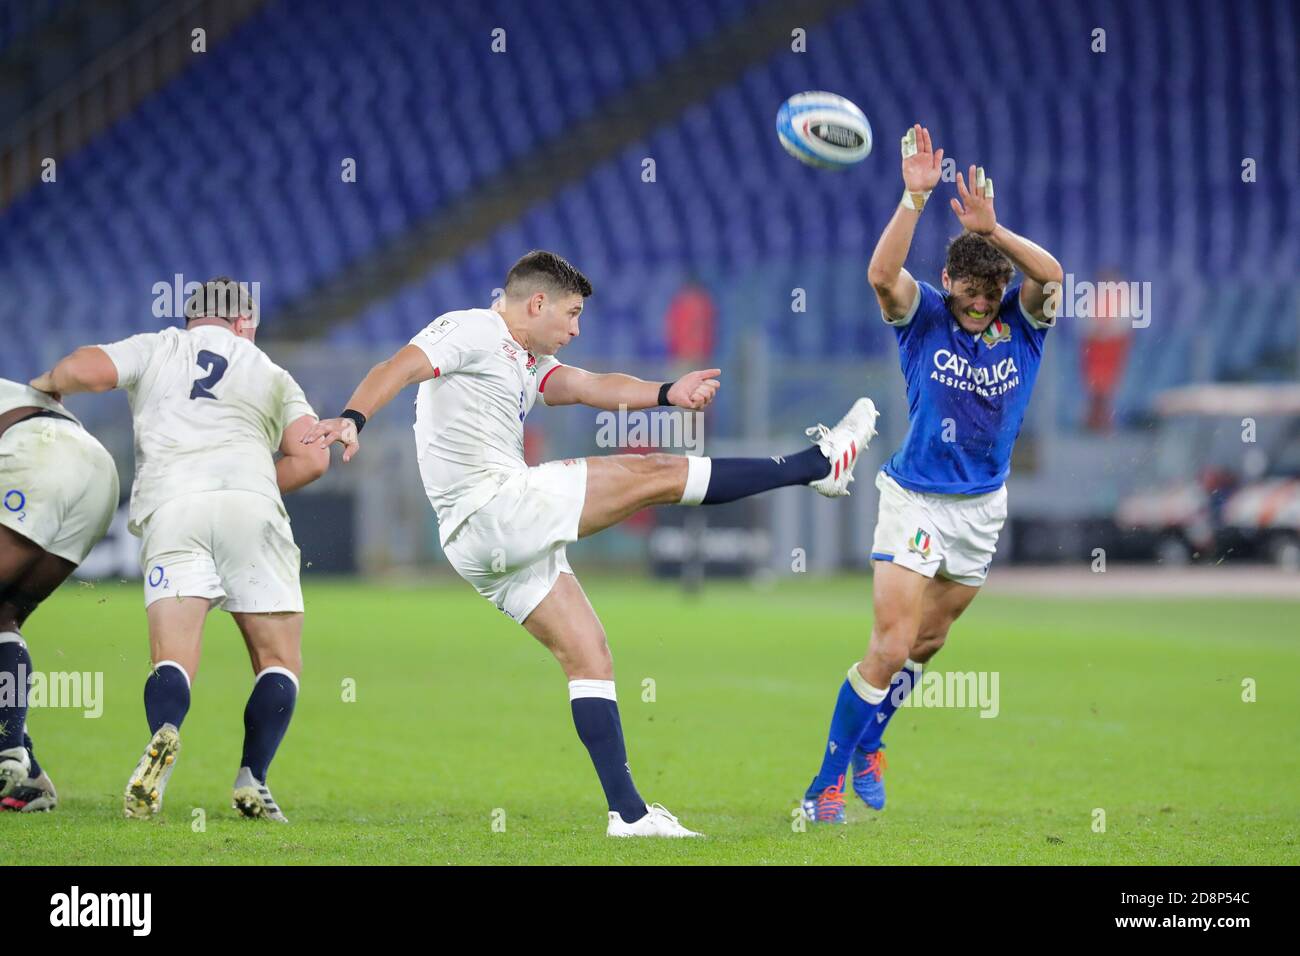 Rome, Italy. 31st Oct, 2020. BEN YOUNGS of England kicks during Italy vs England Rugby Six Nations match at Stadio Olimpico. Credit: Luigi Mariani/LPS/ZUMA Wire/Alamy Live News Stock Photo